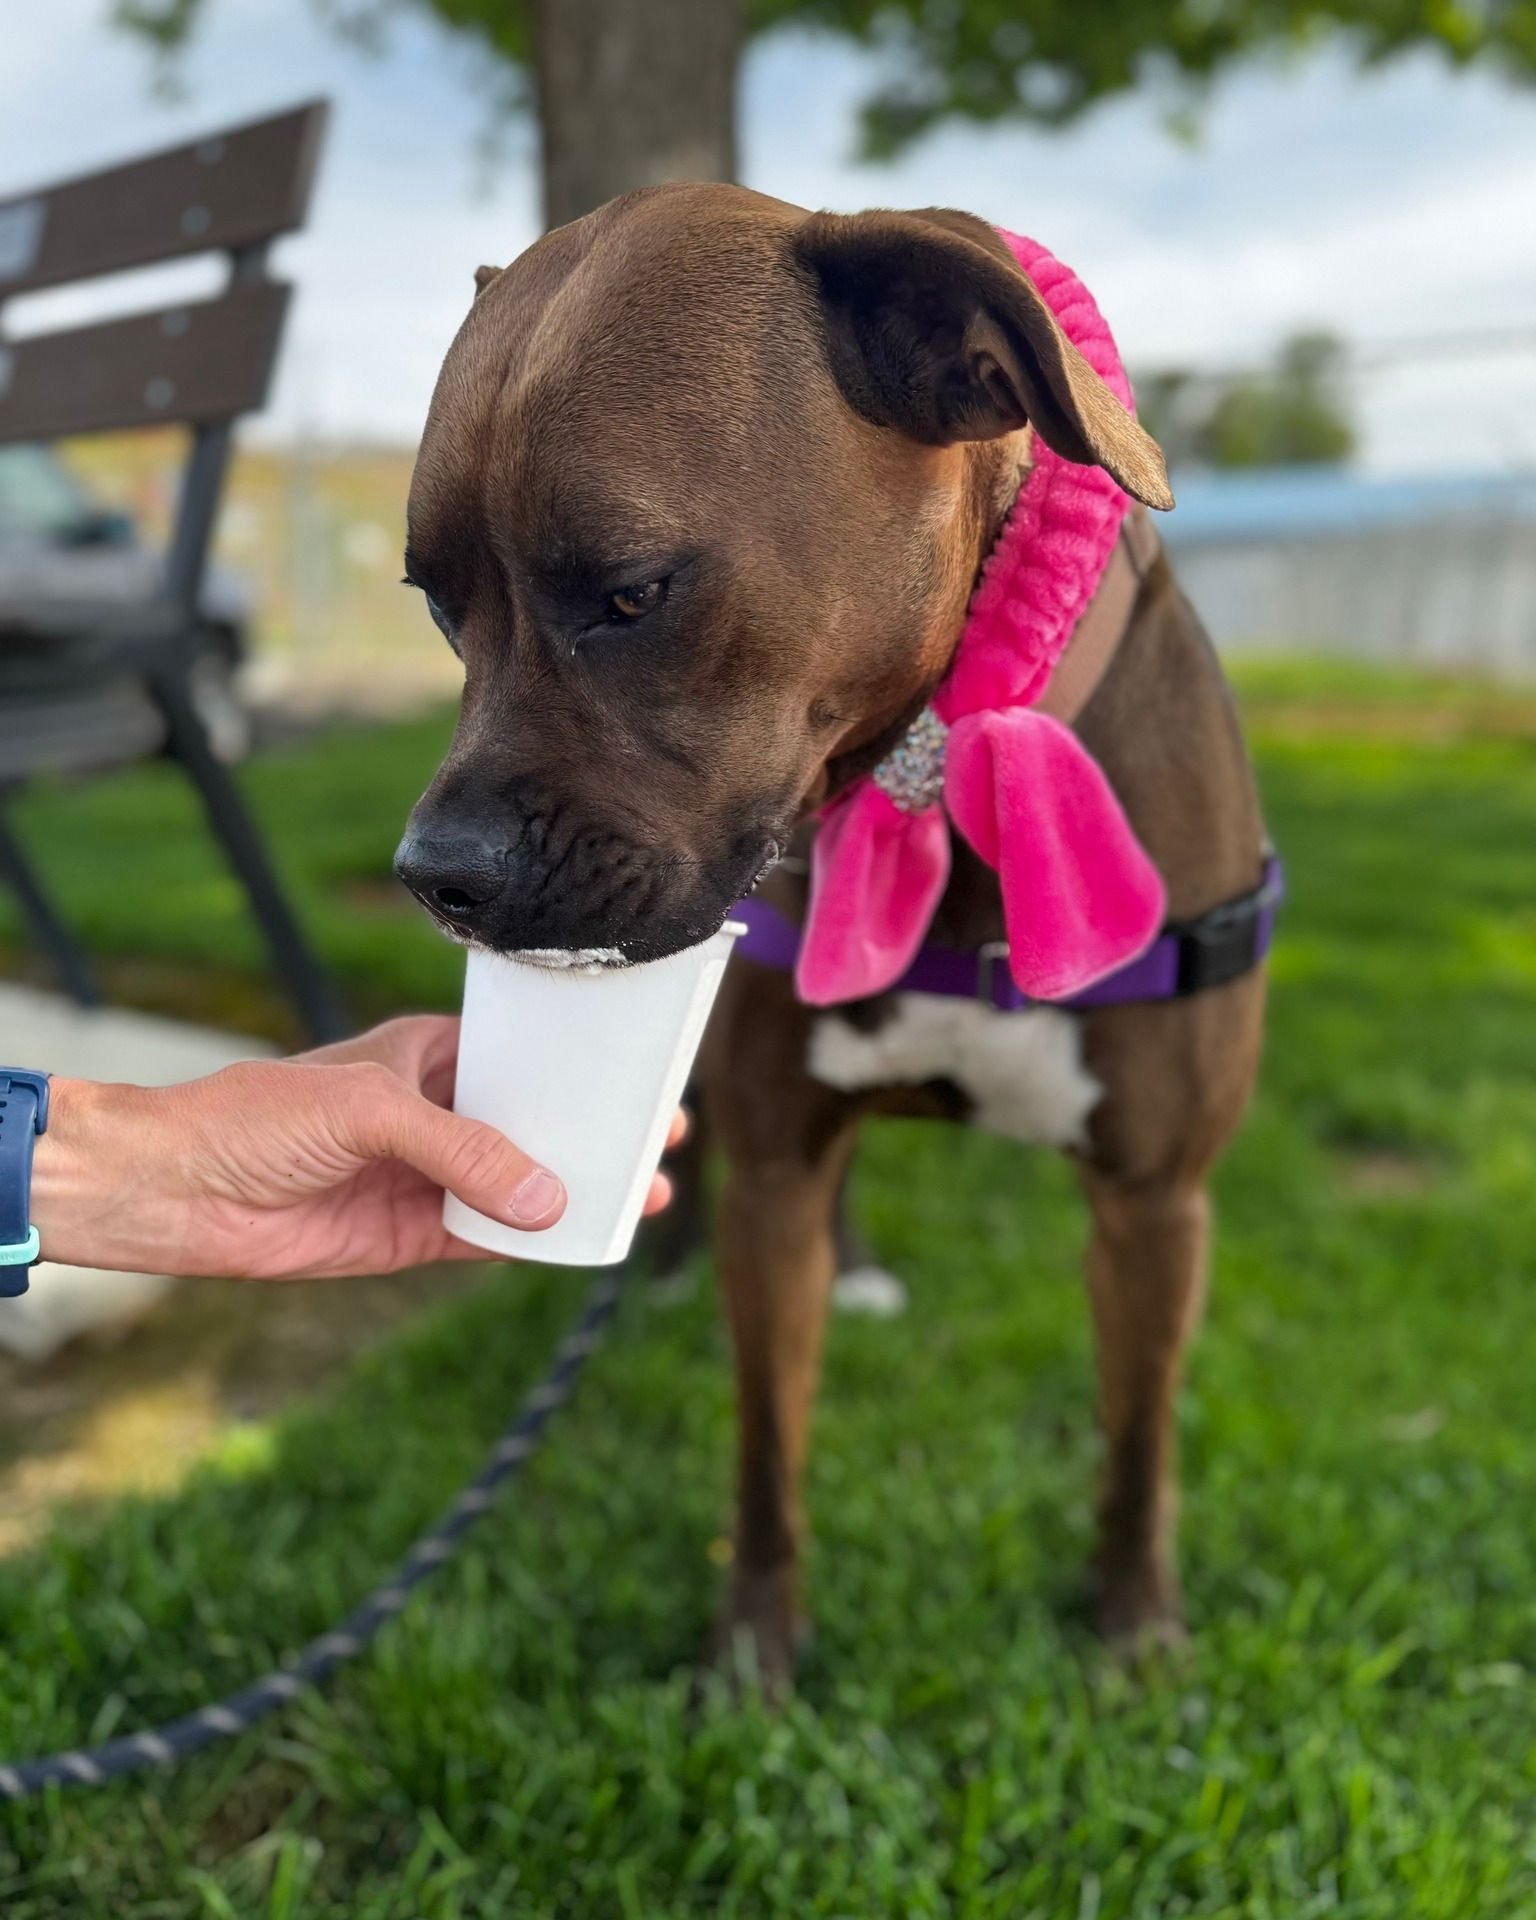 Our volunteers had a fantastic day out with four of our shelter dogs! Bonnie and Machelle took Mia, Dublin, and Lola on separate adventures, while Jane spent some quality time with Gizmo.

Mia had a great time at Washington Park, exploring the playgr